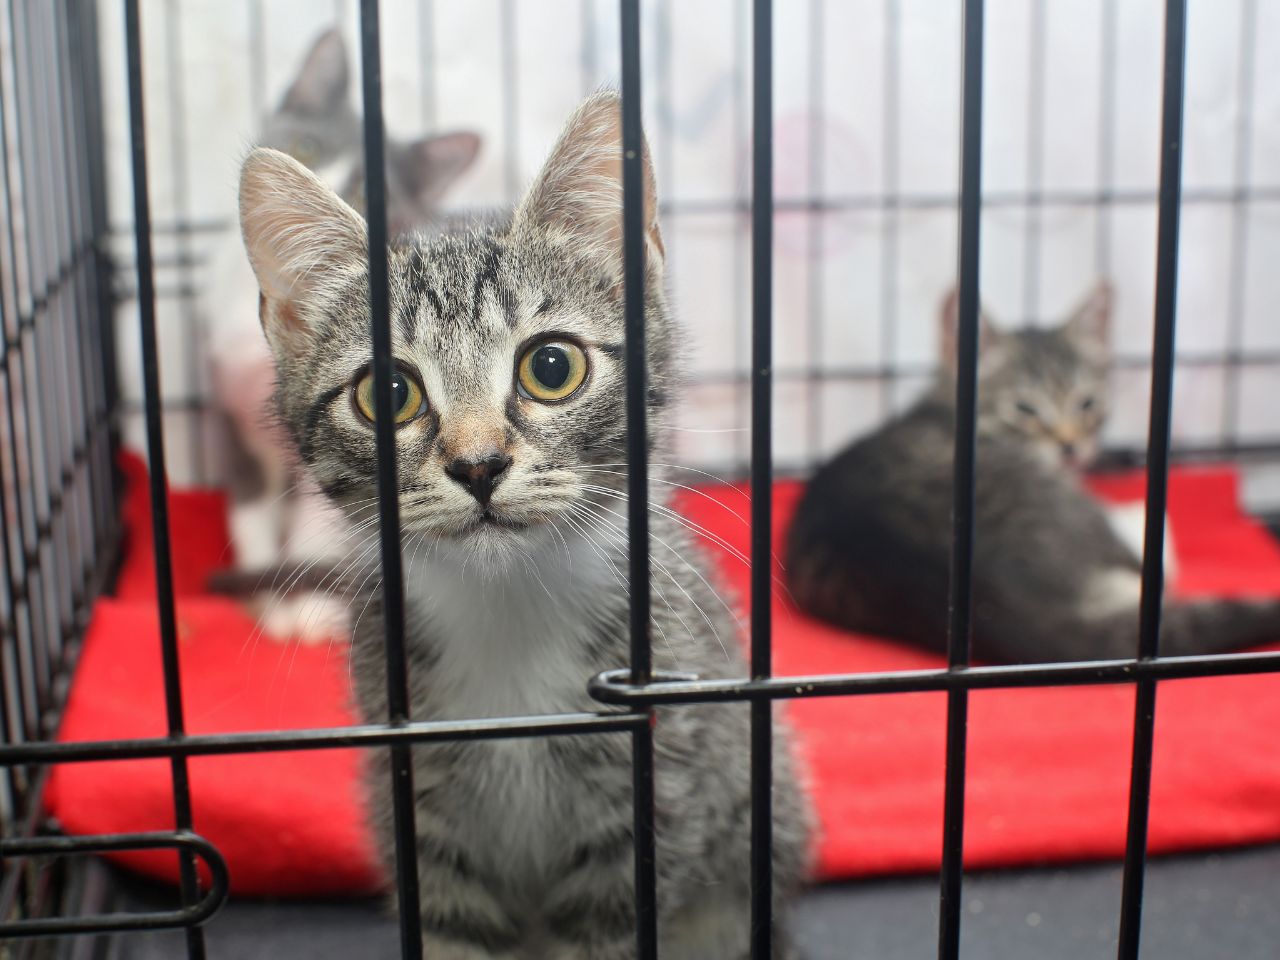  Animal welfare fund launches to help pets exploited for profit 